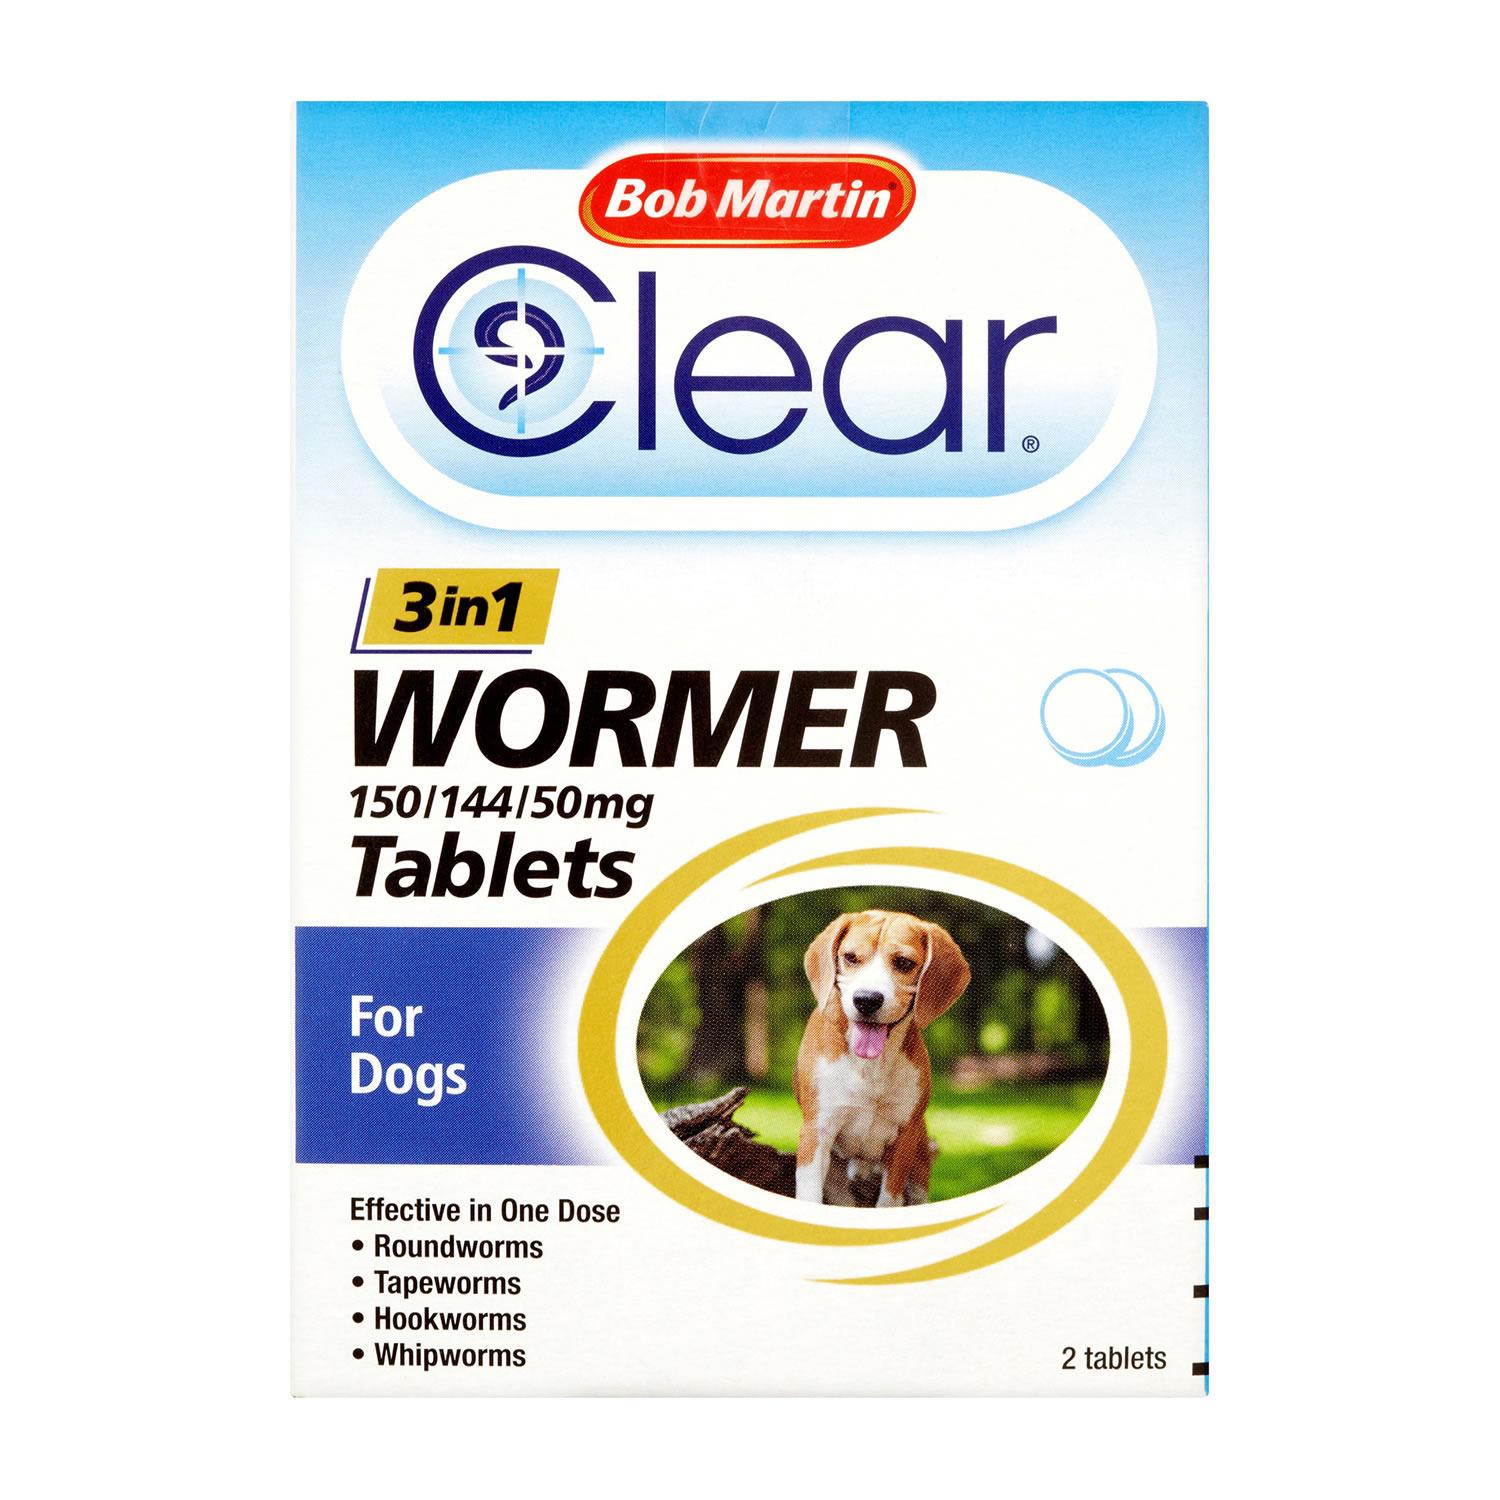 Bob Martin Bob Martin Clear 3 In 1 Wormer Tablets Small & Large Dog Puppy Worming Treatment 